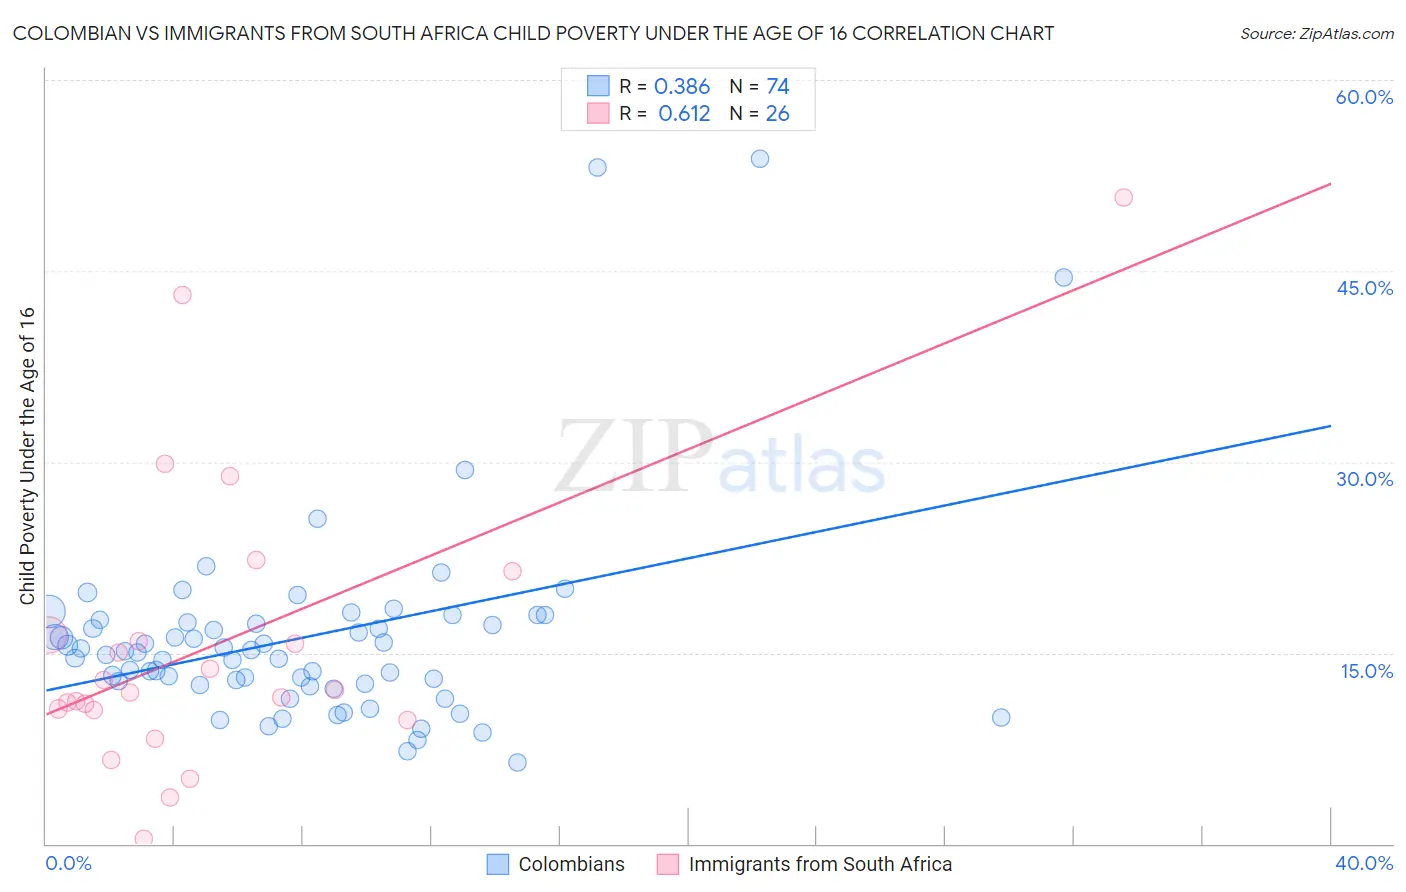 Colombian vs Immigrants from South Africa Child Poverty Under the Age of 16